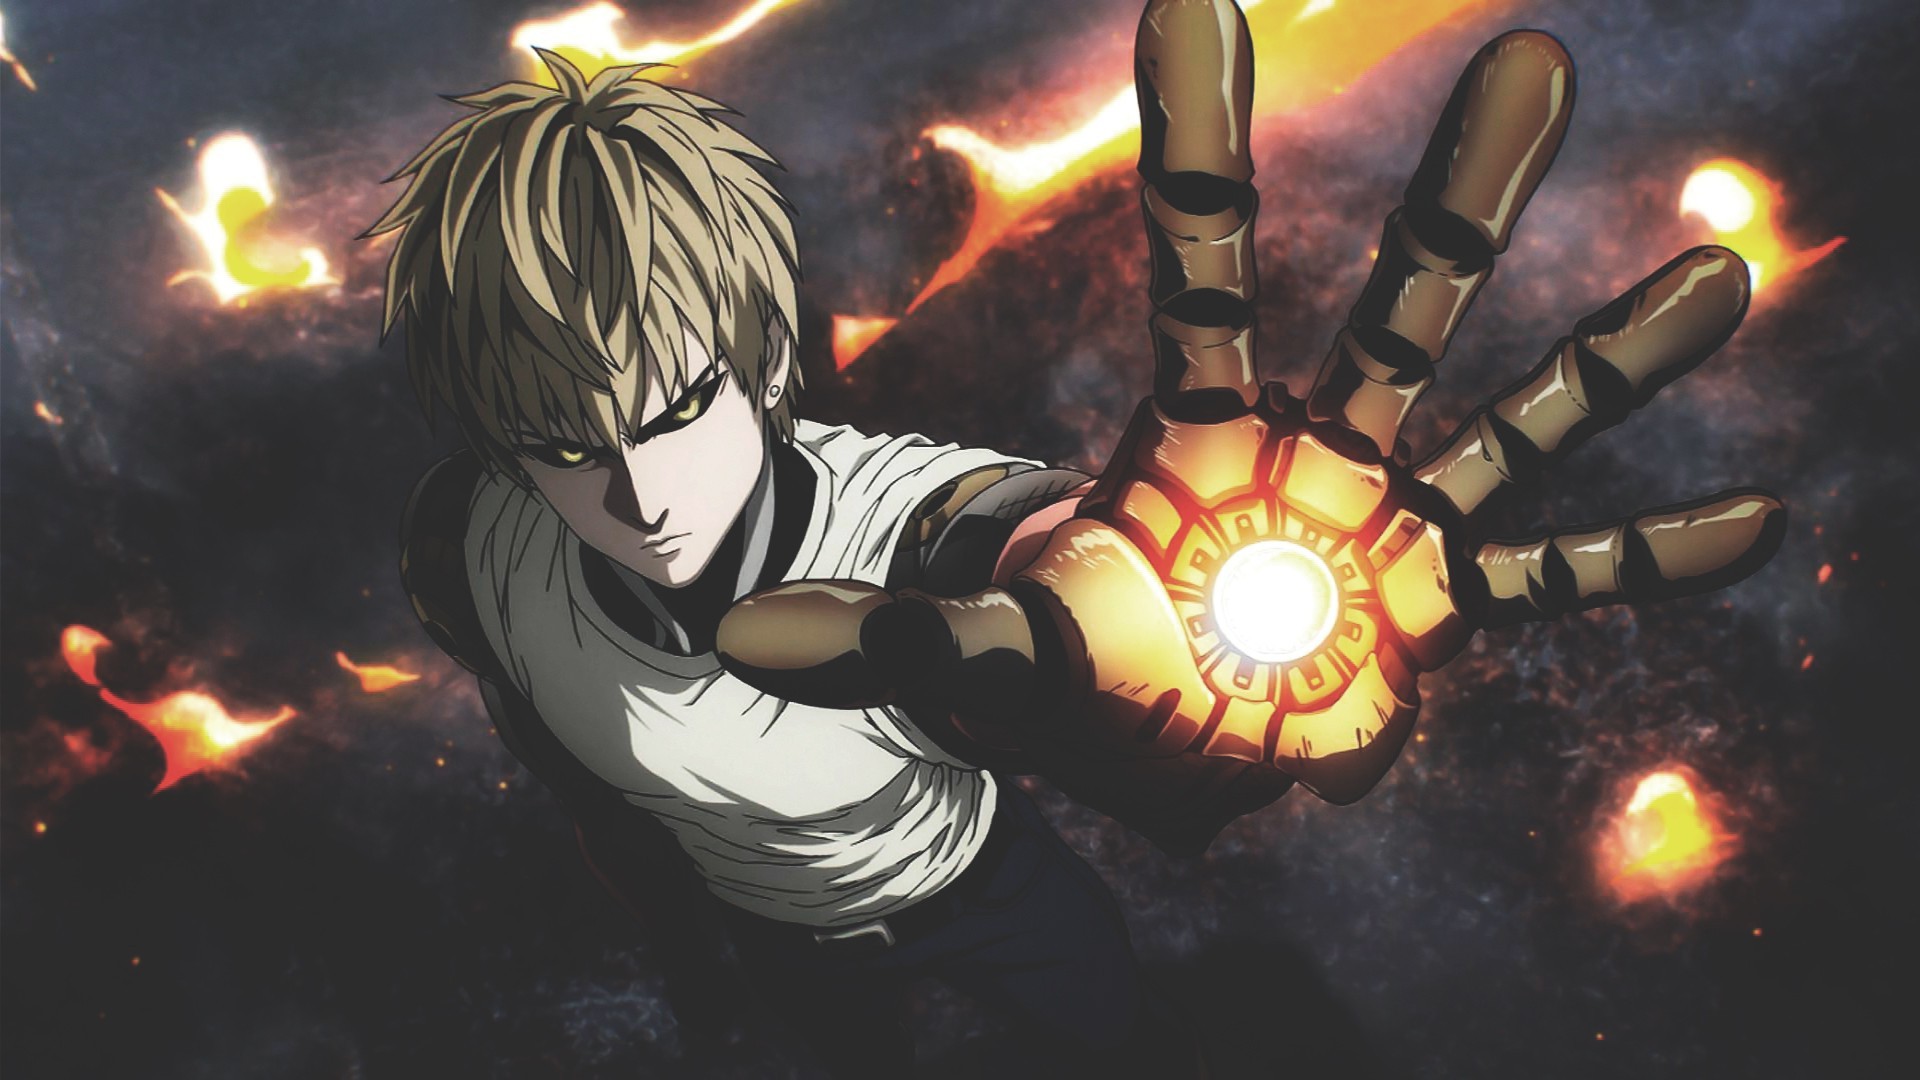 Genos One Punch Man anime characters wallpaper  1440x2038  1043539   WallpaperUP